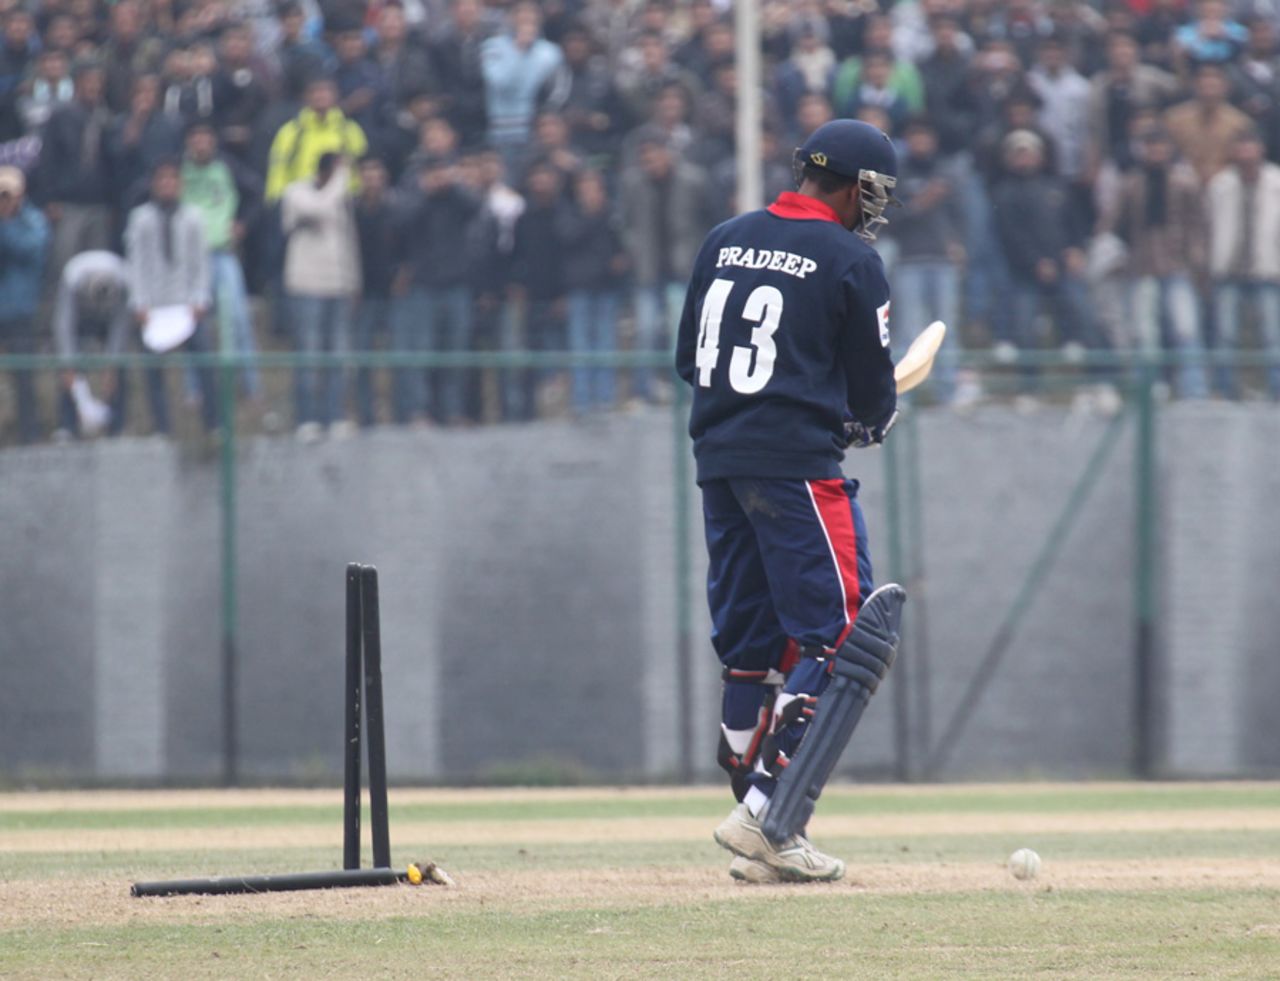 Nepal's Pradeep Airee has his stumps destroyed by Hong Kong's Irfan Ahmed on the opening day of the ACC Twenty20 Cup 2011 in Kathmandu on 3rd December 2011